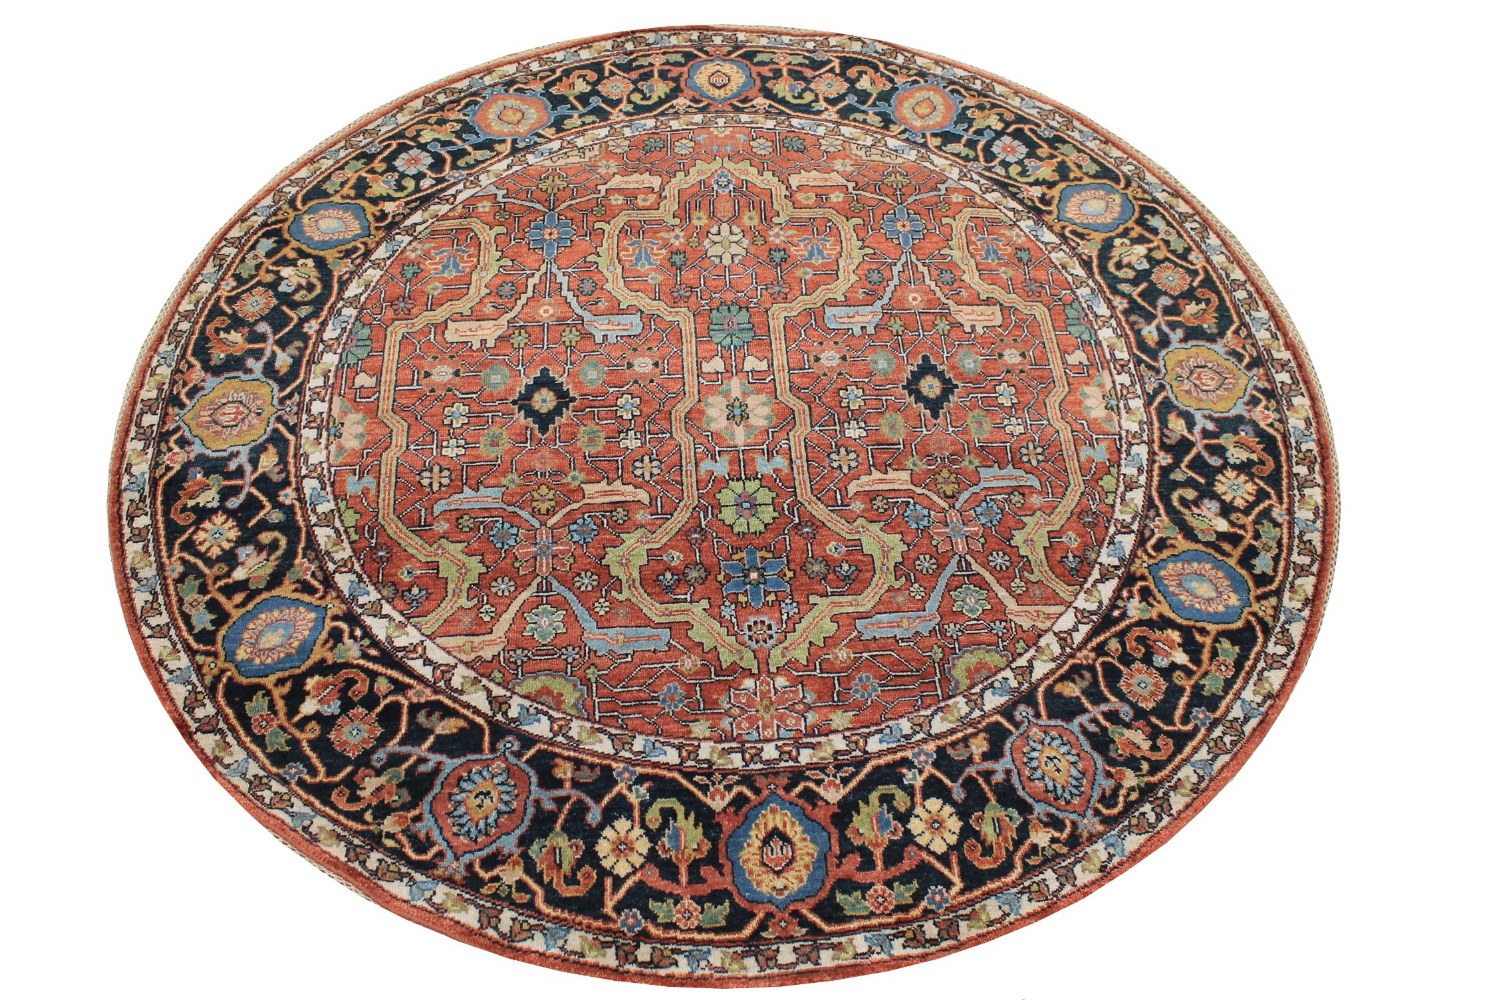 6 ft. - 7 ft. Round & Square Heriz/Serapi Hand Knotted Wool Area Rug - MR026502